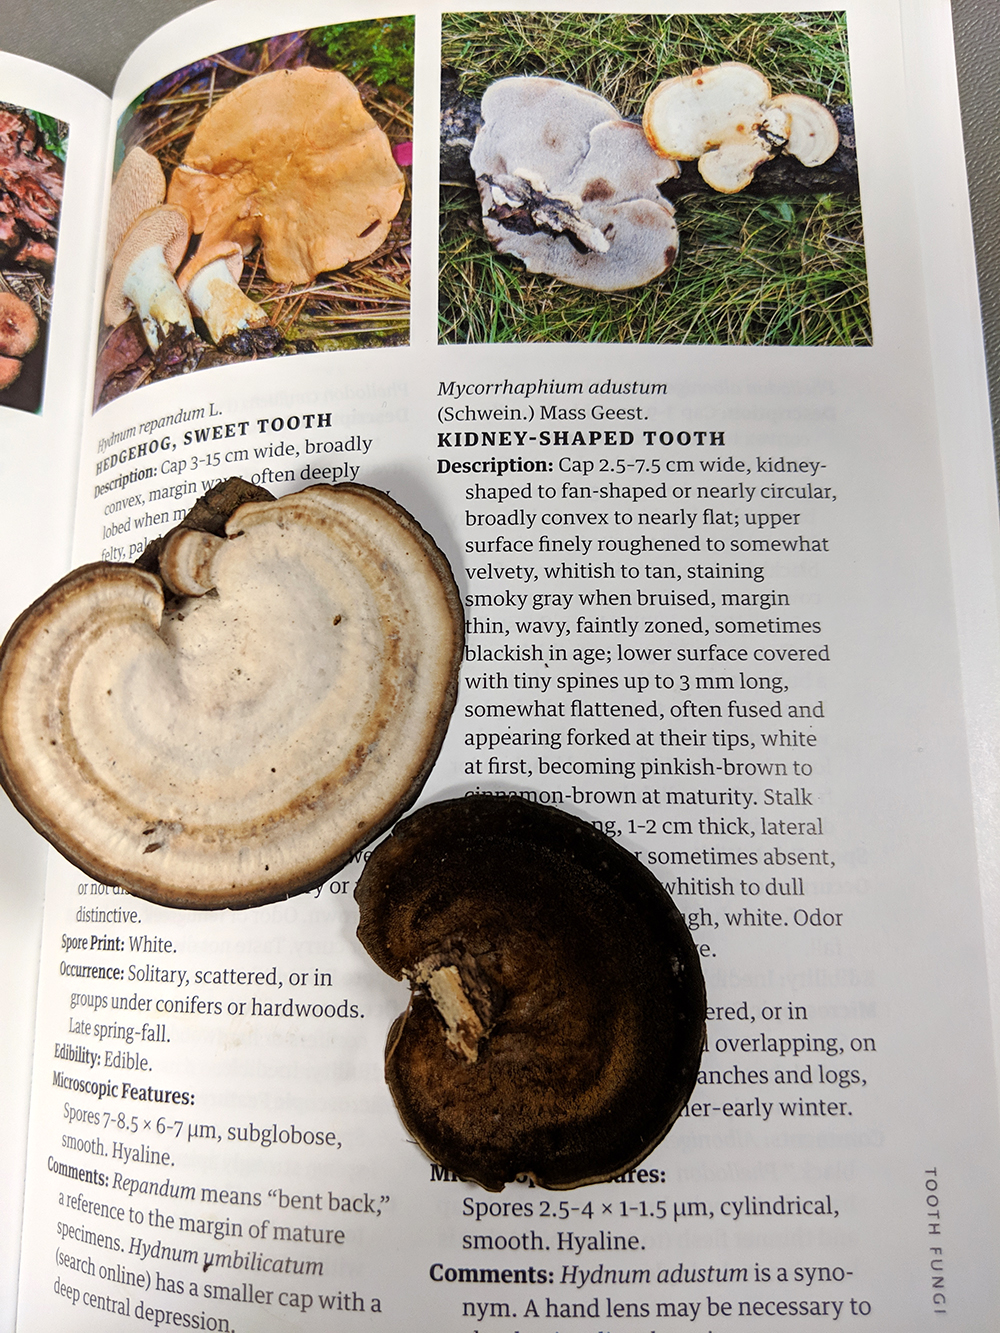 We brought some of the mushrooms we found back to the classroom and continued to practice identifying them with our mushroom books. 